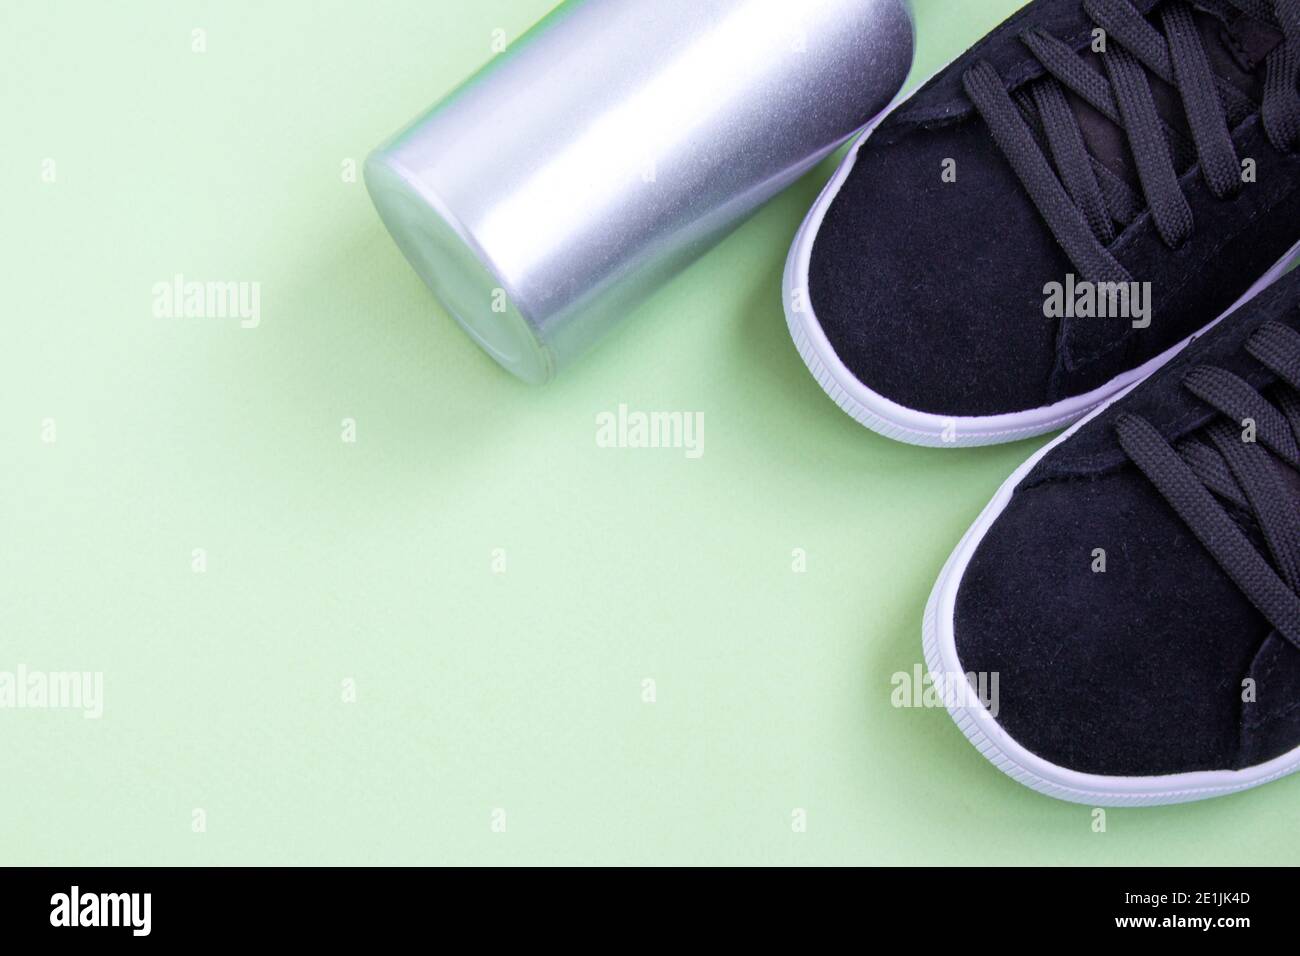 Black sneakers and iron bottle of water on green background. Concept of healthy lifestyle, everyday training. Shoes for women's training. Diagonal com Stock Photo